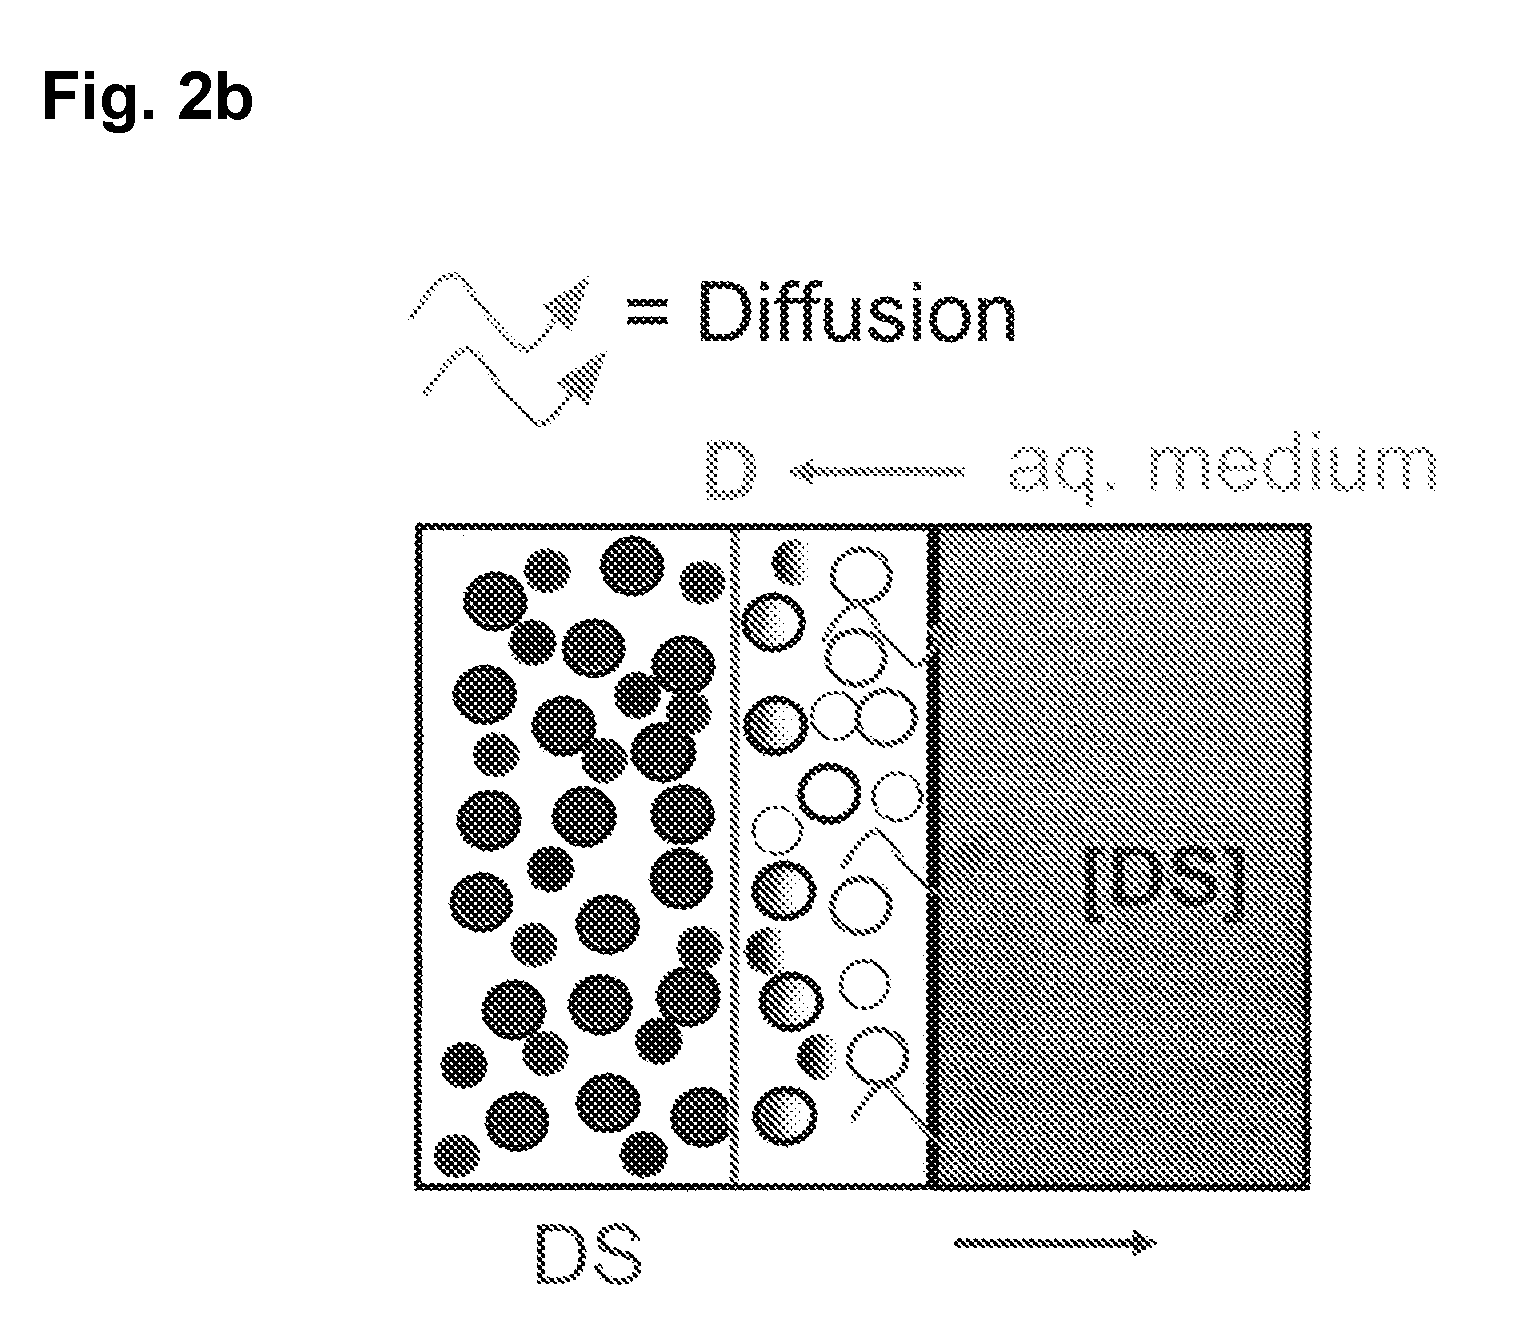 Extended release tablet formulations of flibanserin and method for manufacturing the same